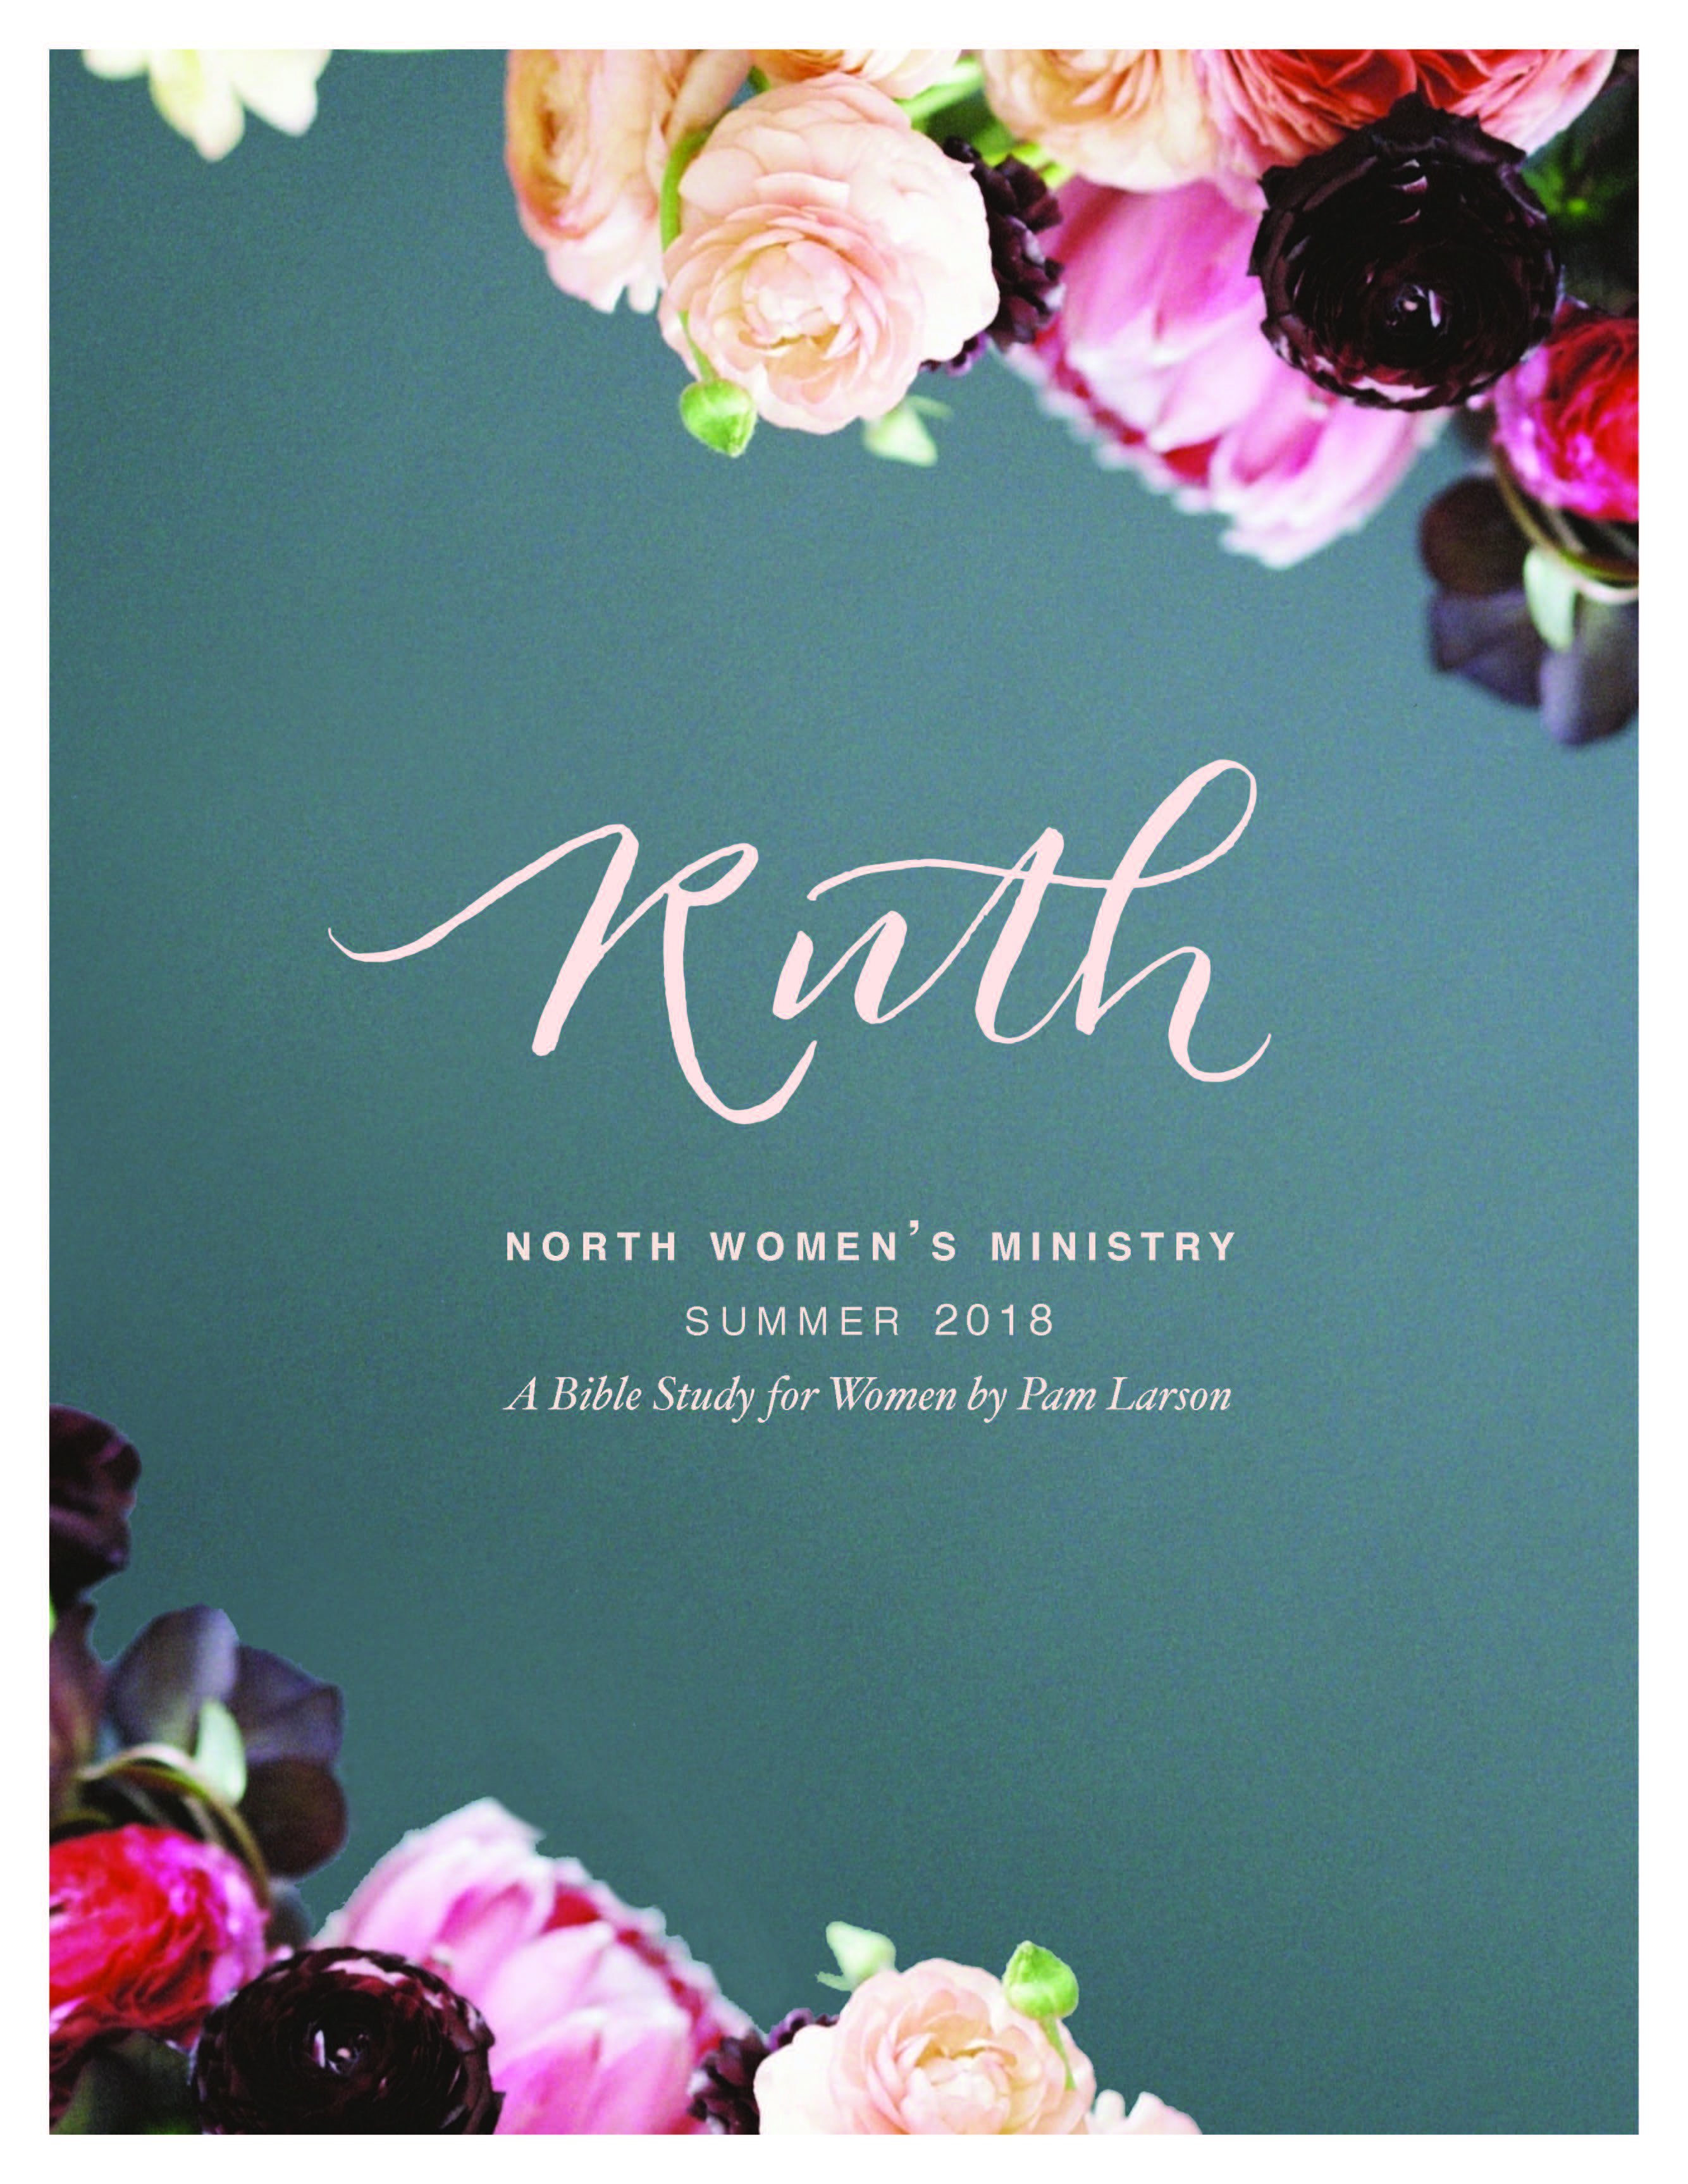 Week 1 Introduction to Ruth study by Pam Larson